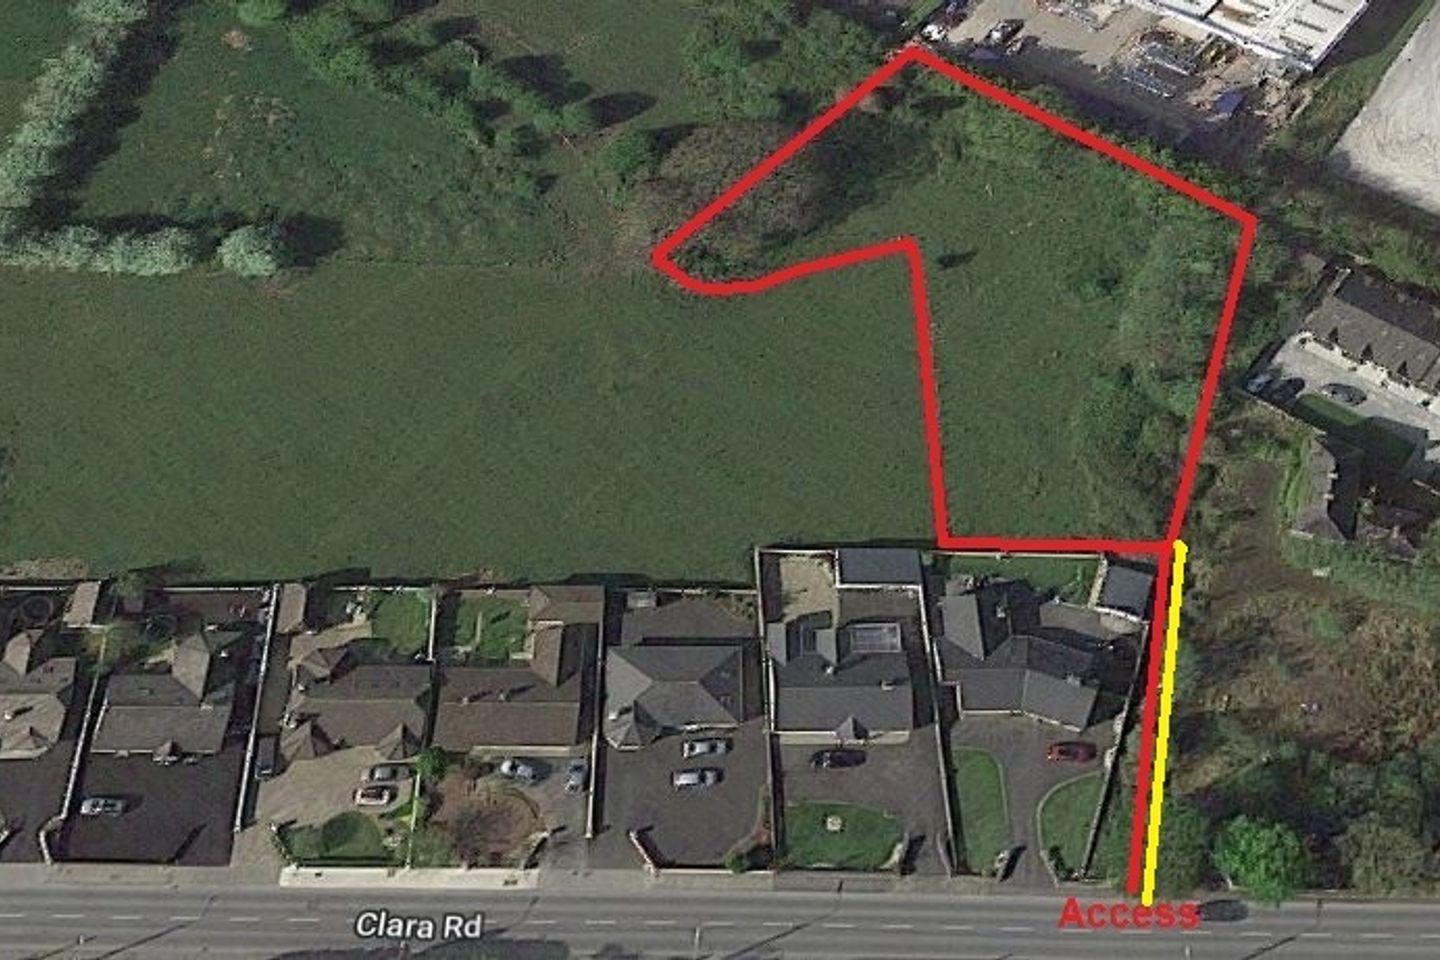 c.0.85 acres of development lands, Clara Road, Tullamore, Co. Offaly